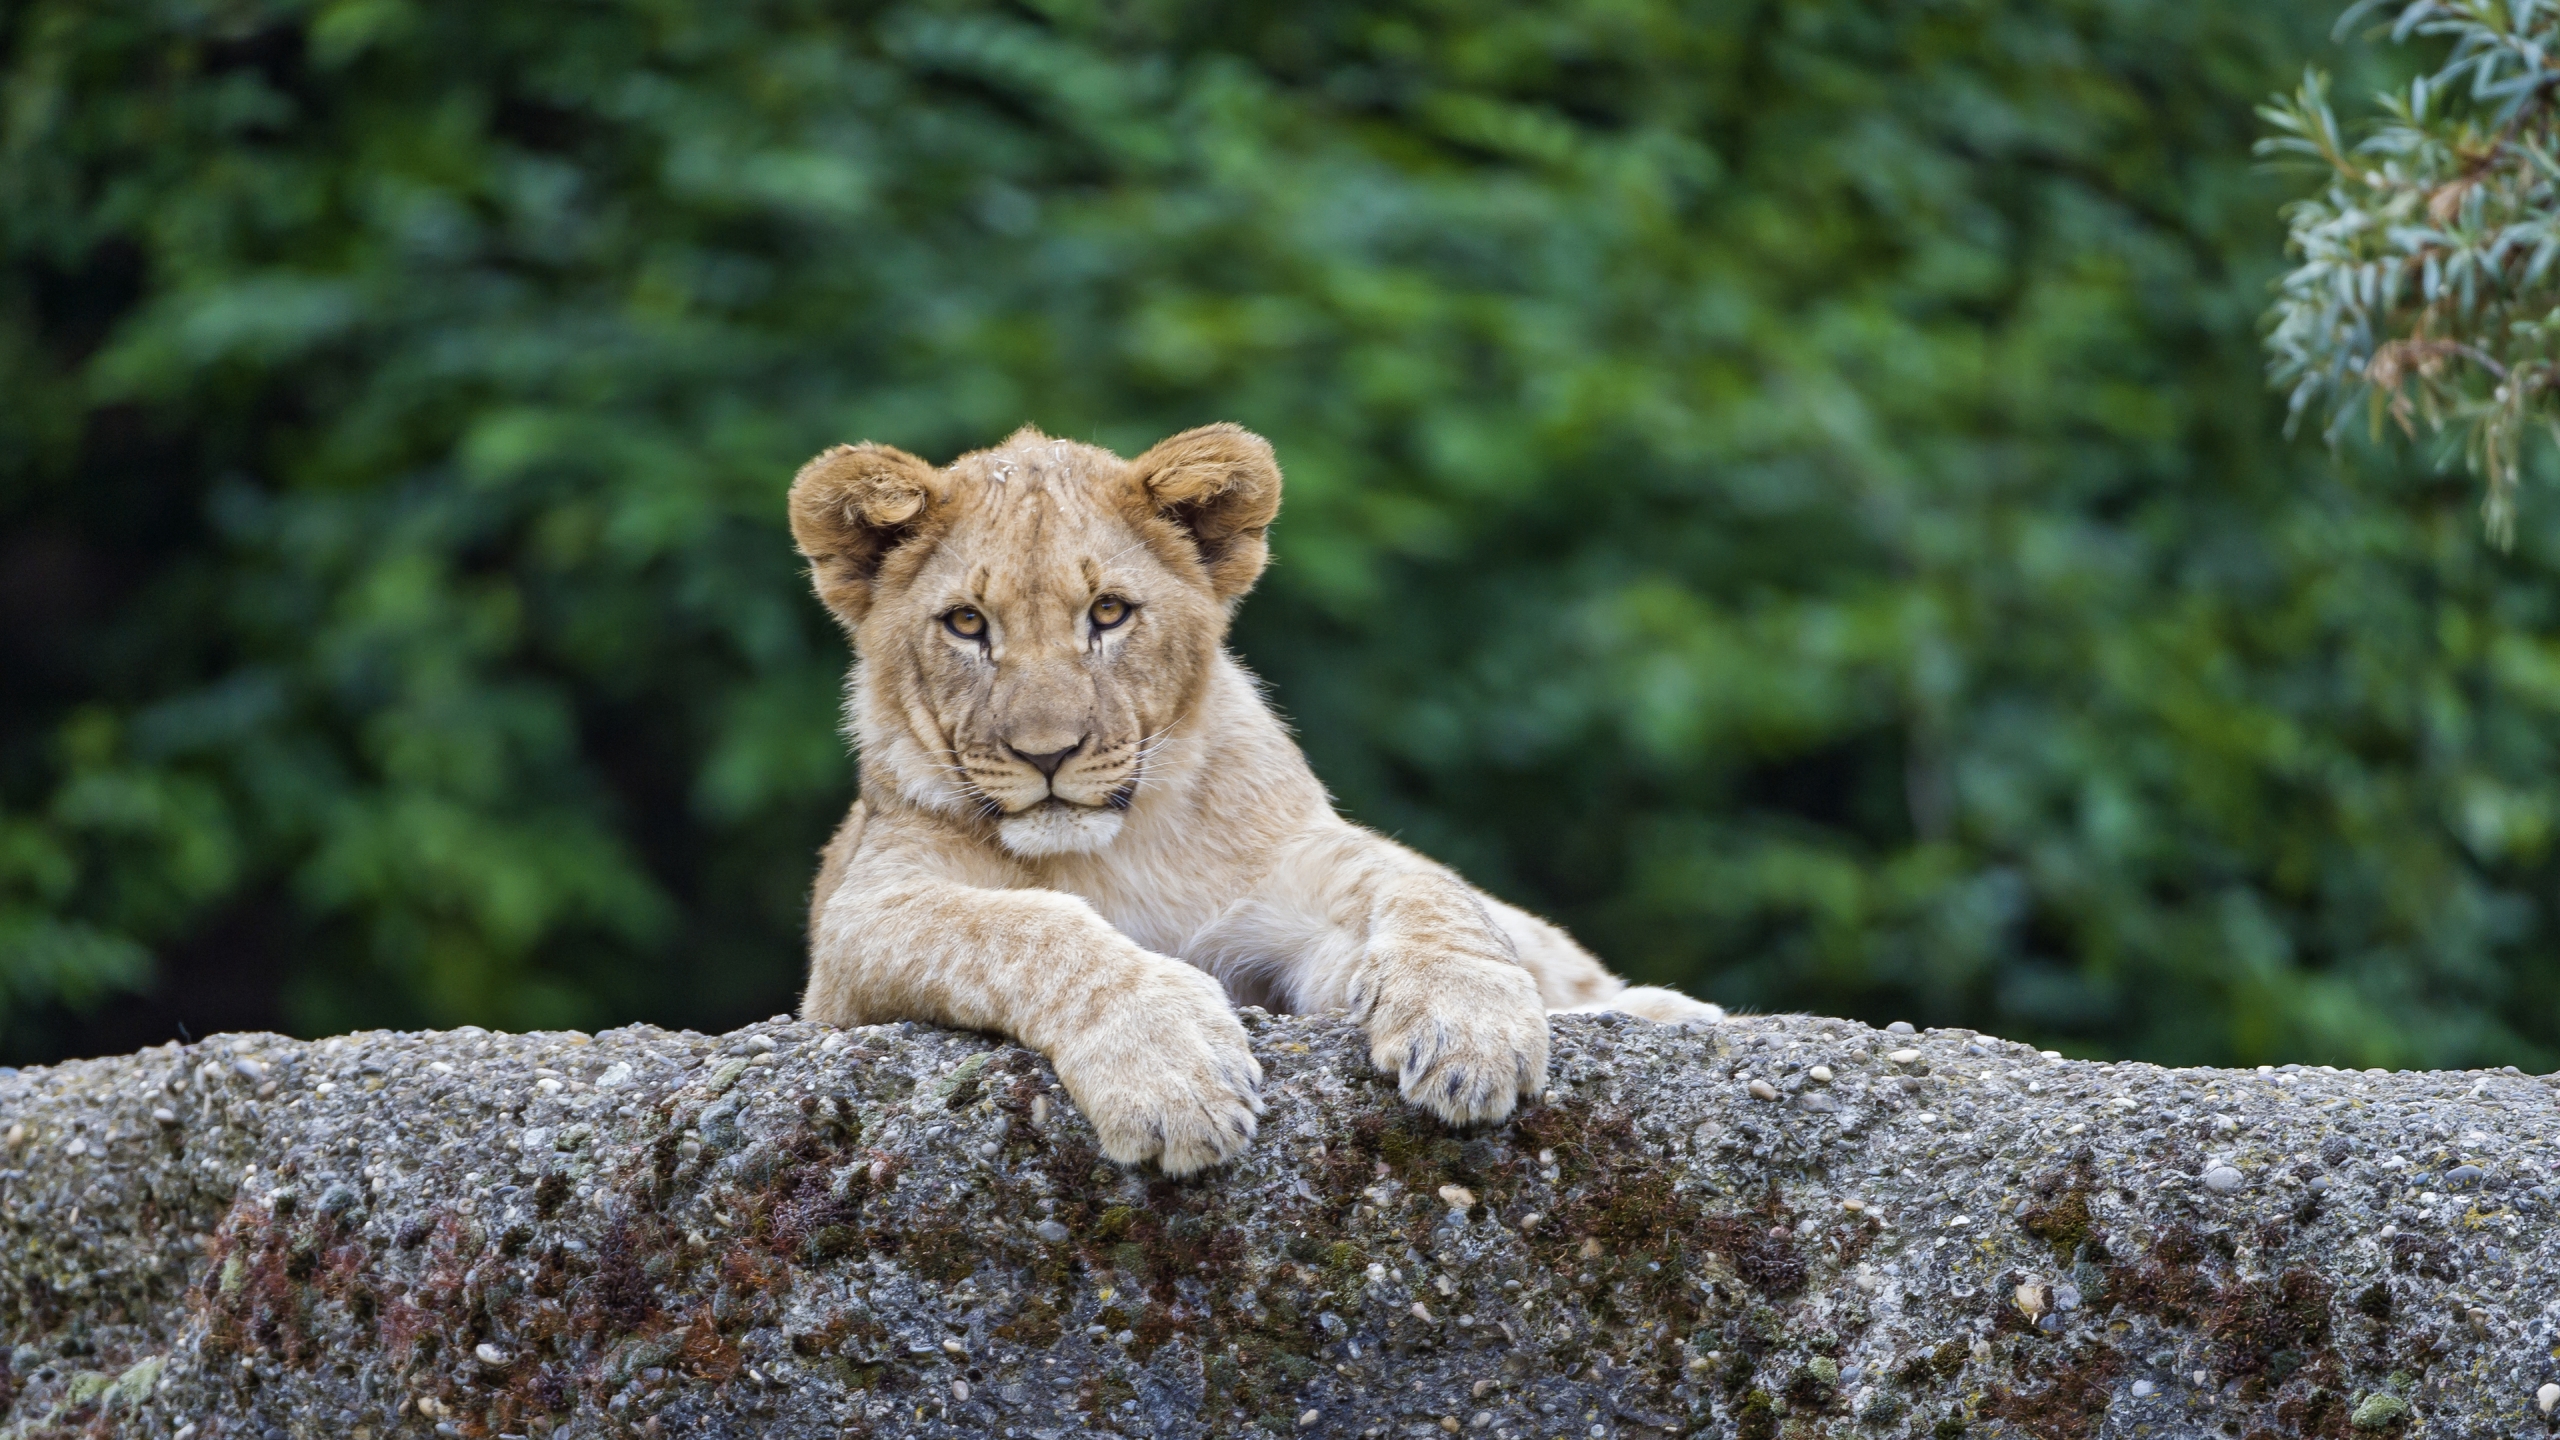 Young Cute Lion for 2560x1440 HDTV resolution